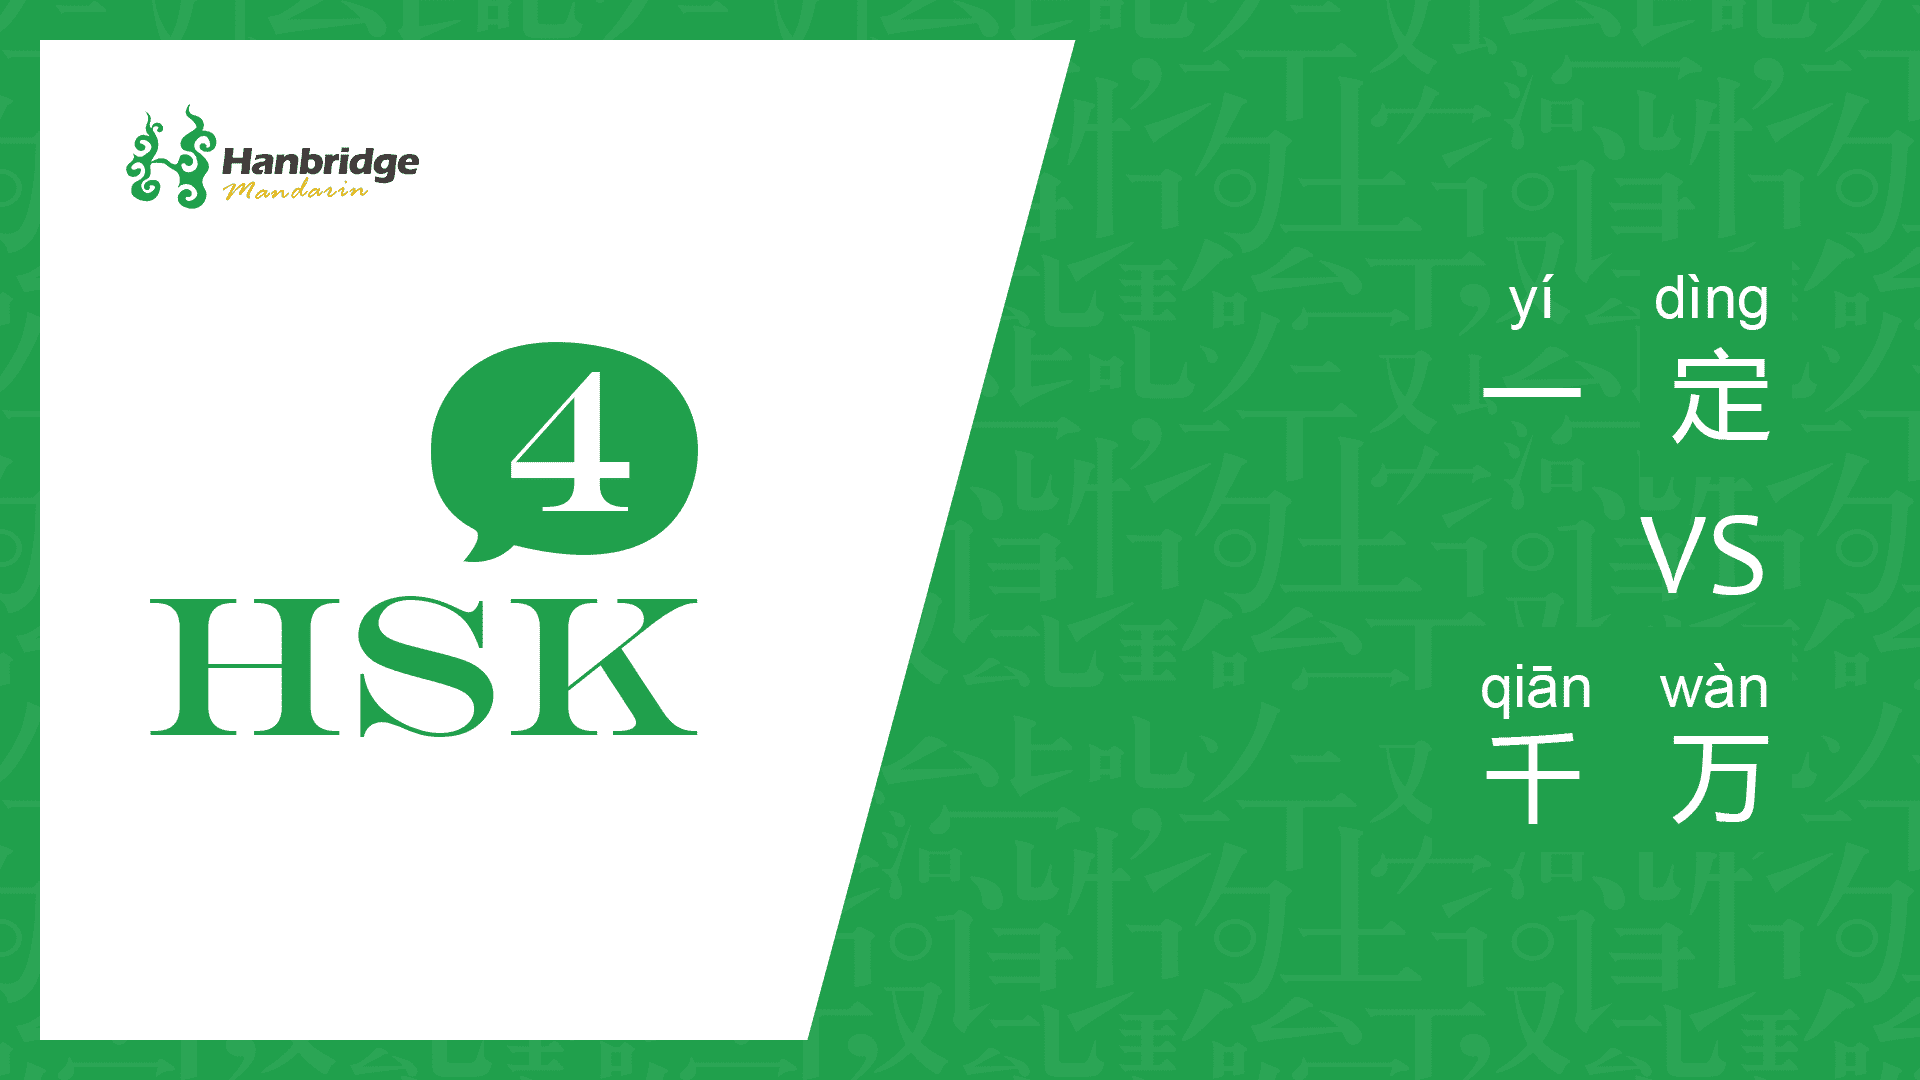 HSK 4 learning 千万 and 一定